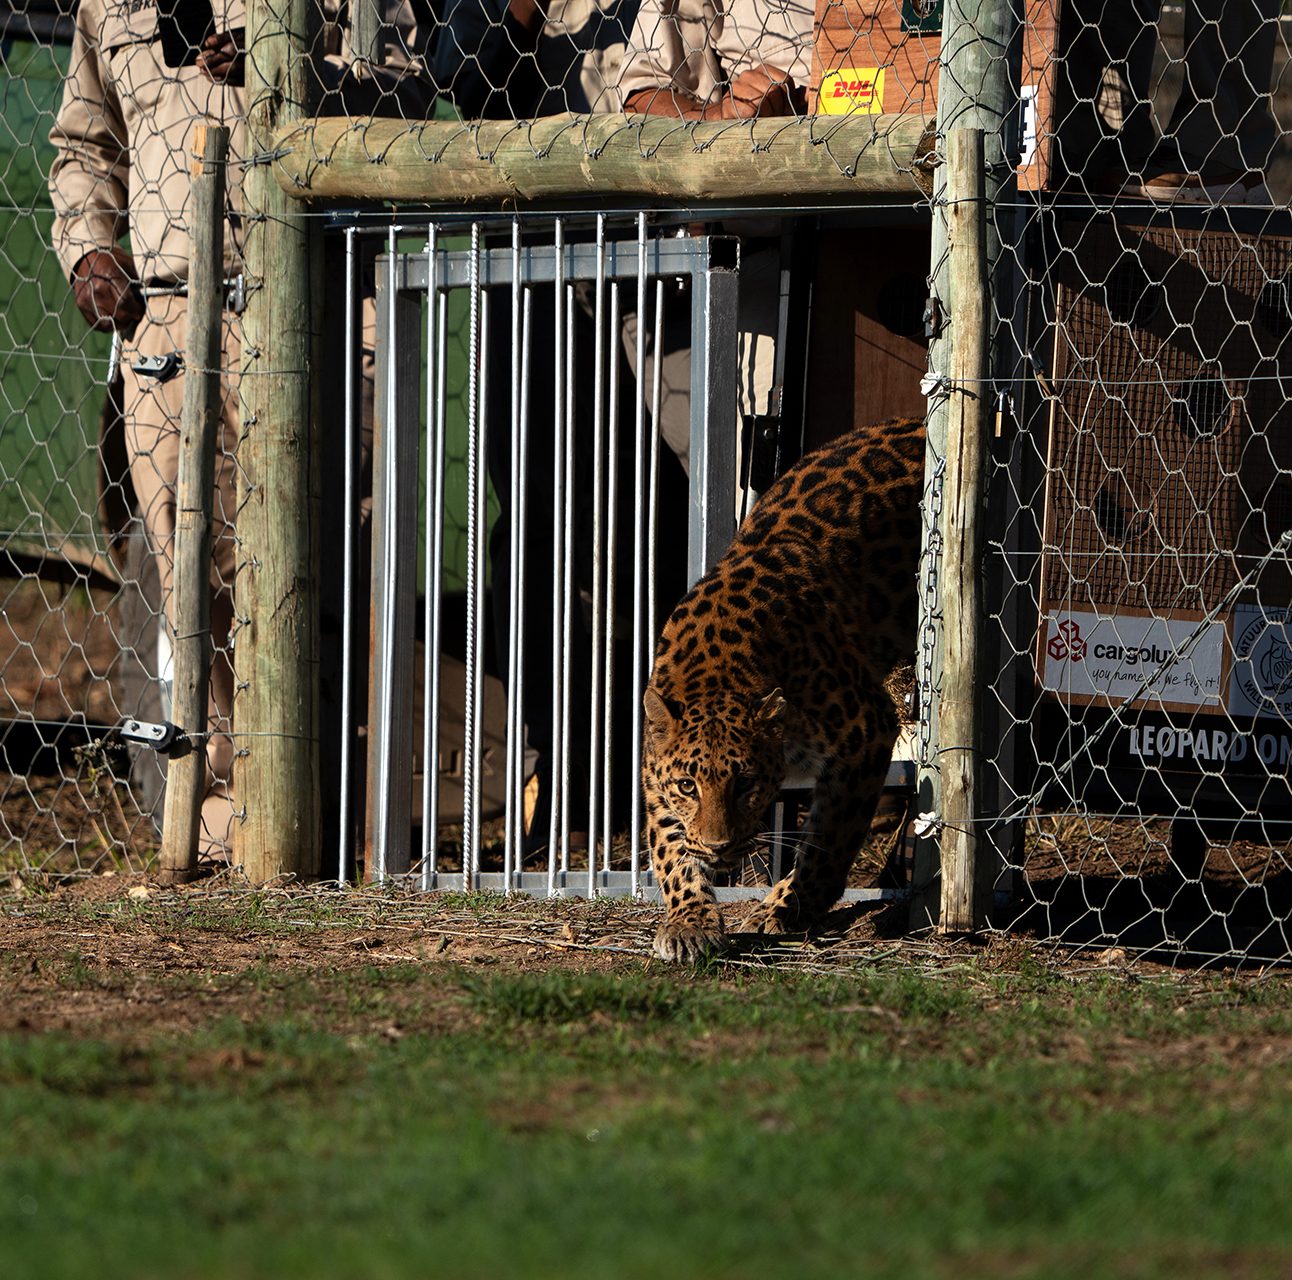 A female leopard emerging from a crate, into a South African sanctuary enclosure